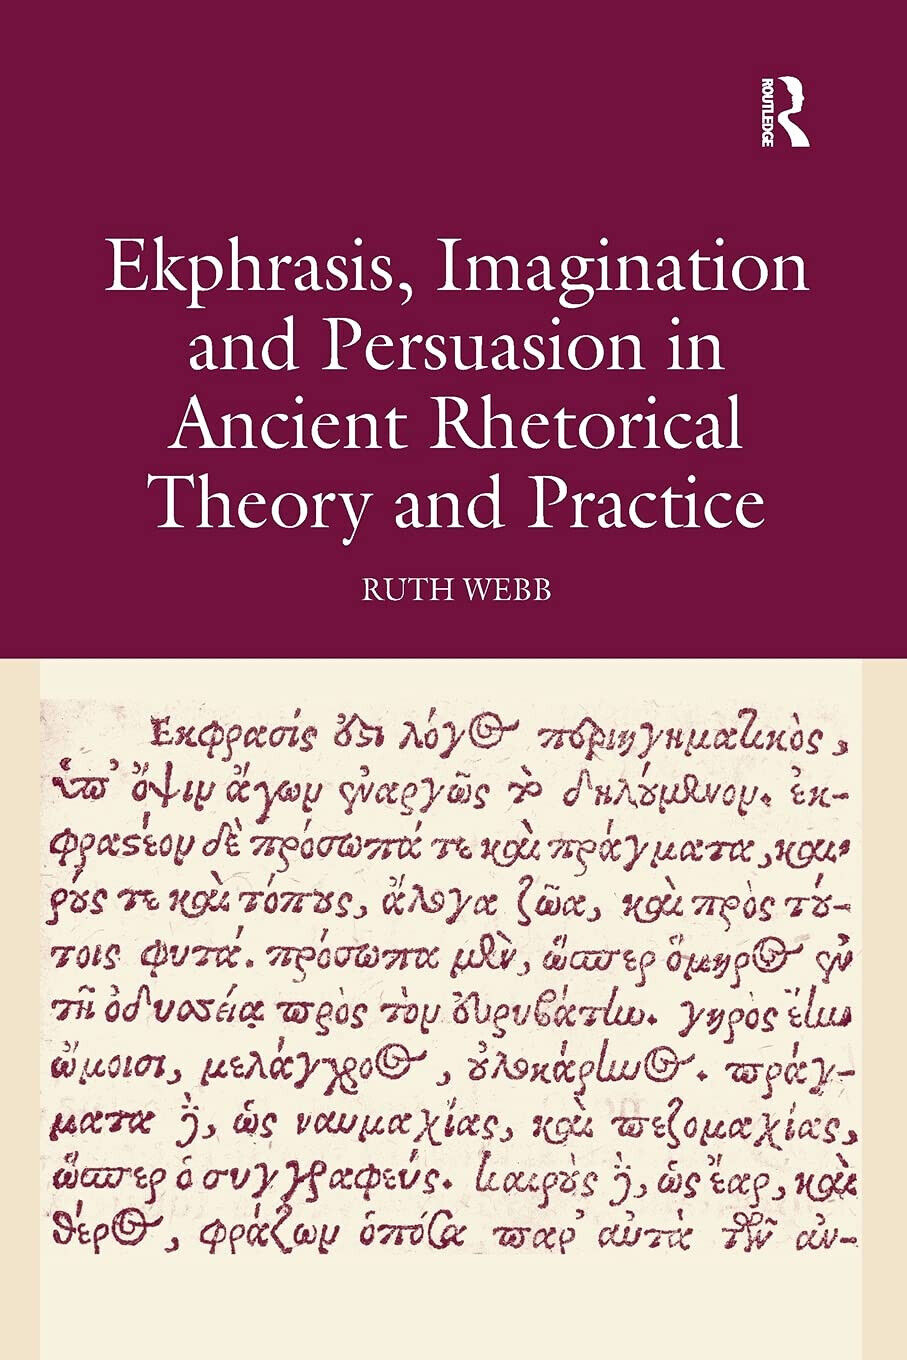 Ekphrasis, Imagination and Persuasion in Ancient Rhetorical Theory and Practice libro usato